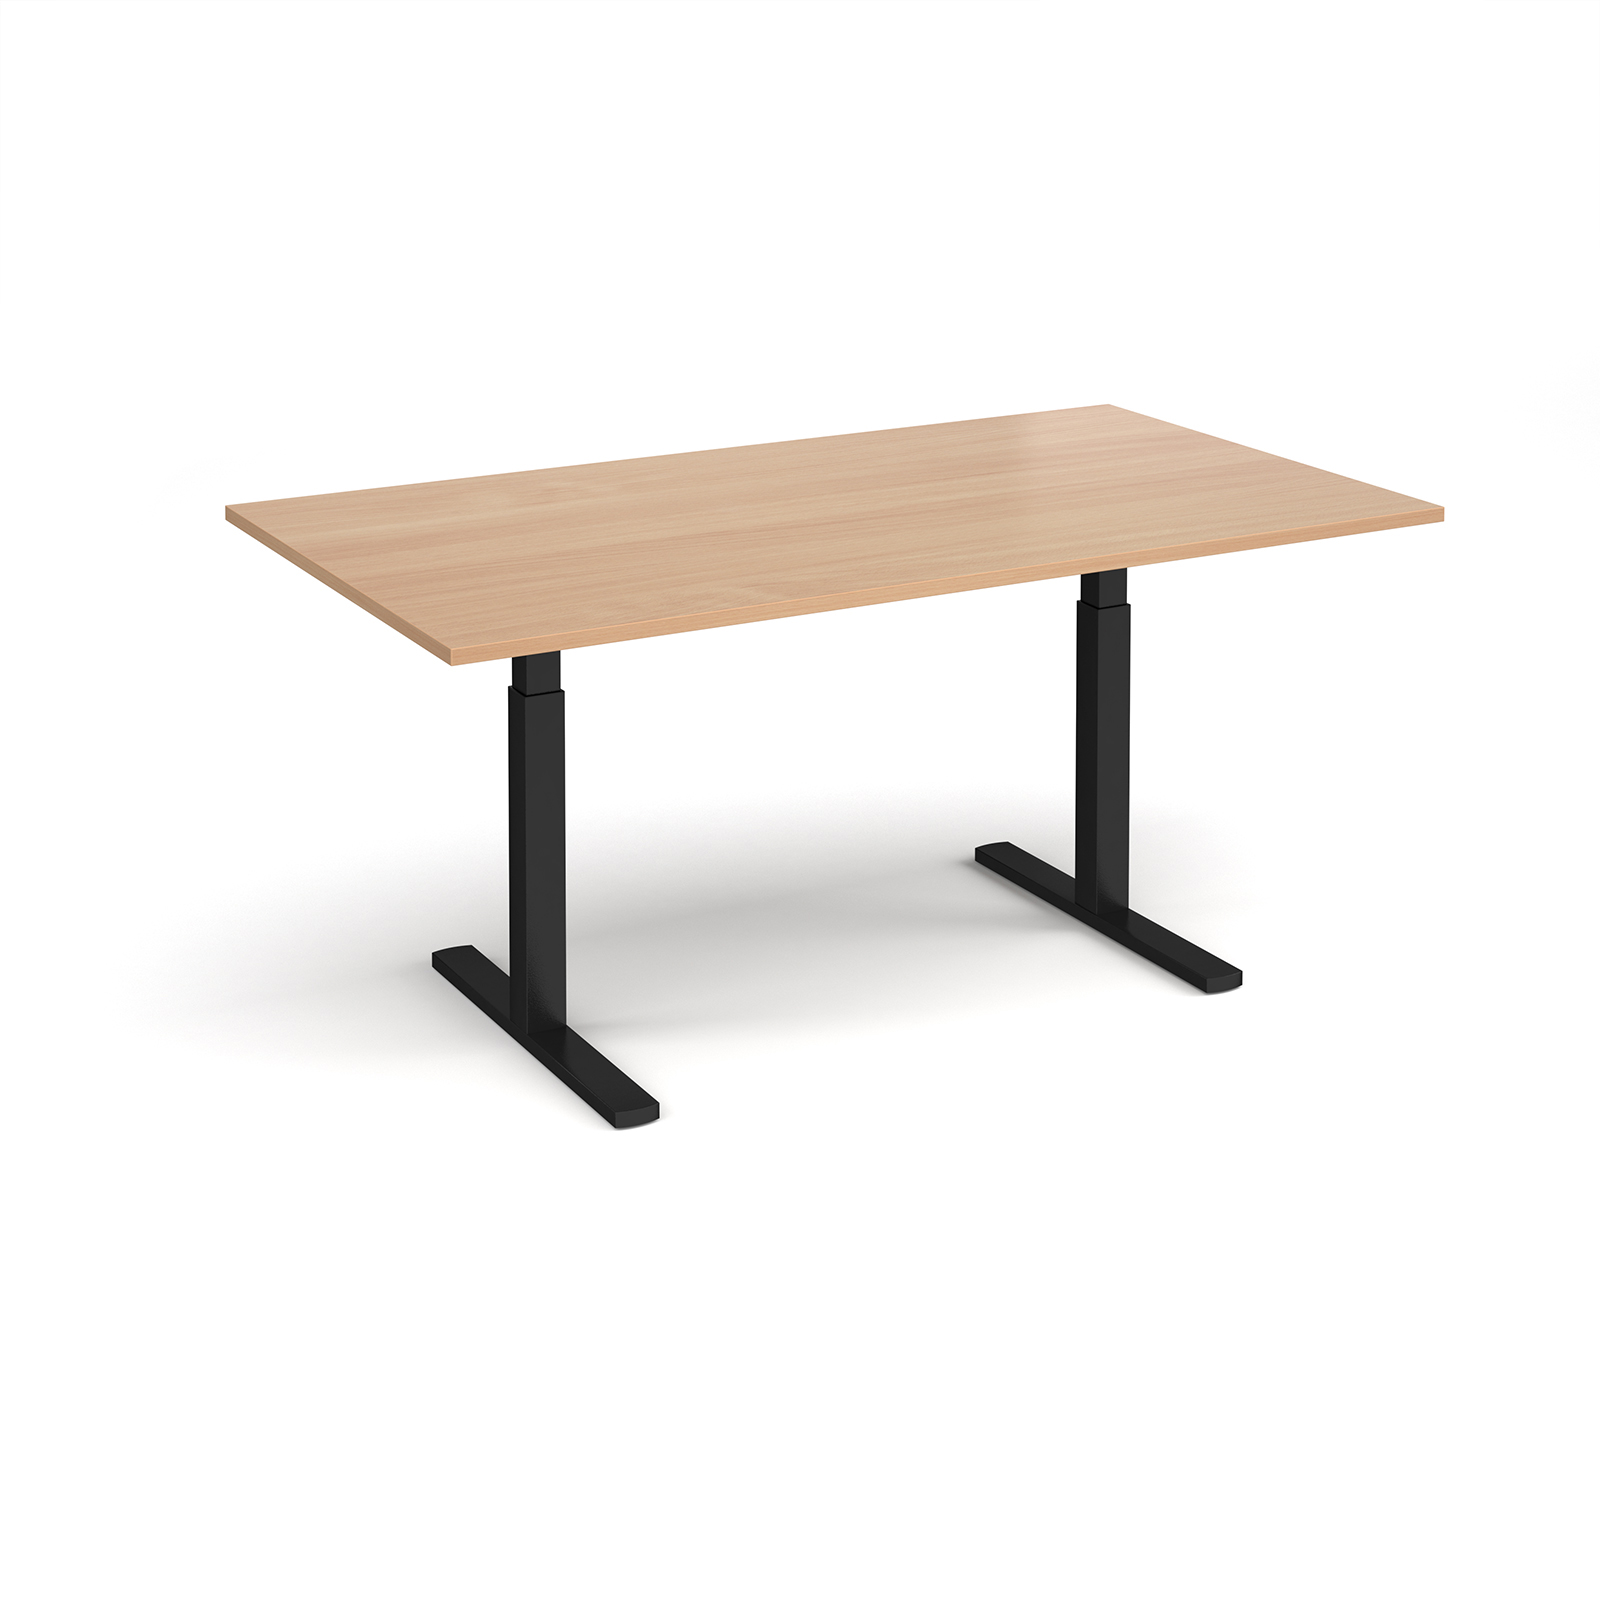 Elev8 Touch boardroom table 1800mm x 1000mm - black frame, beech top